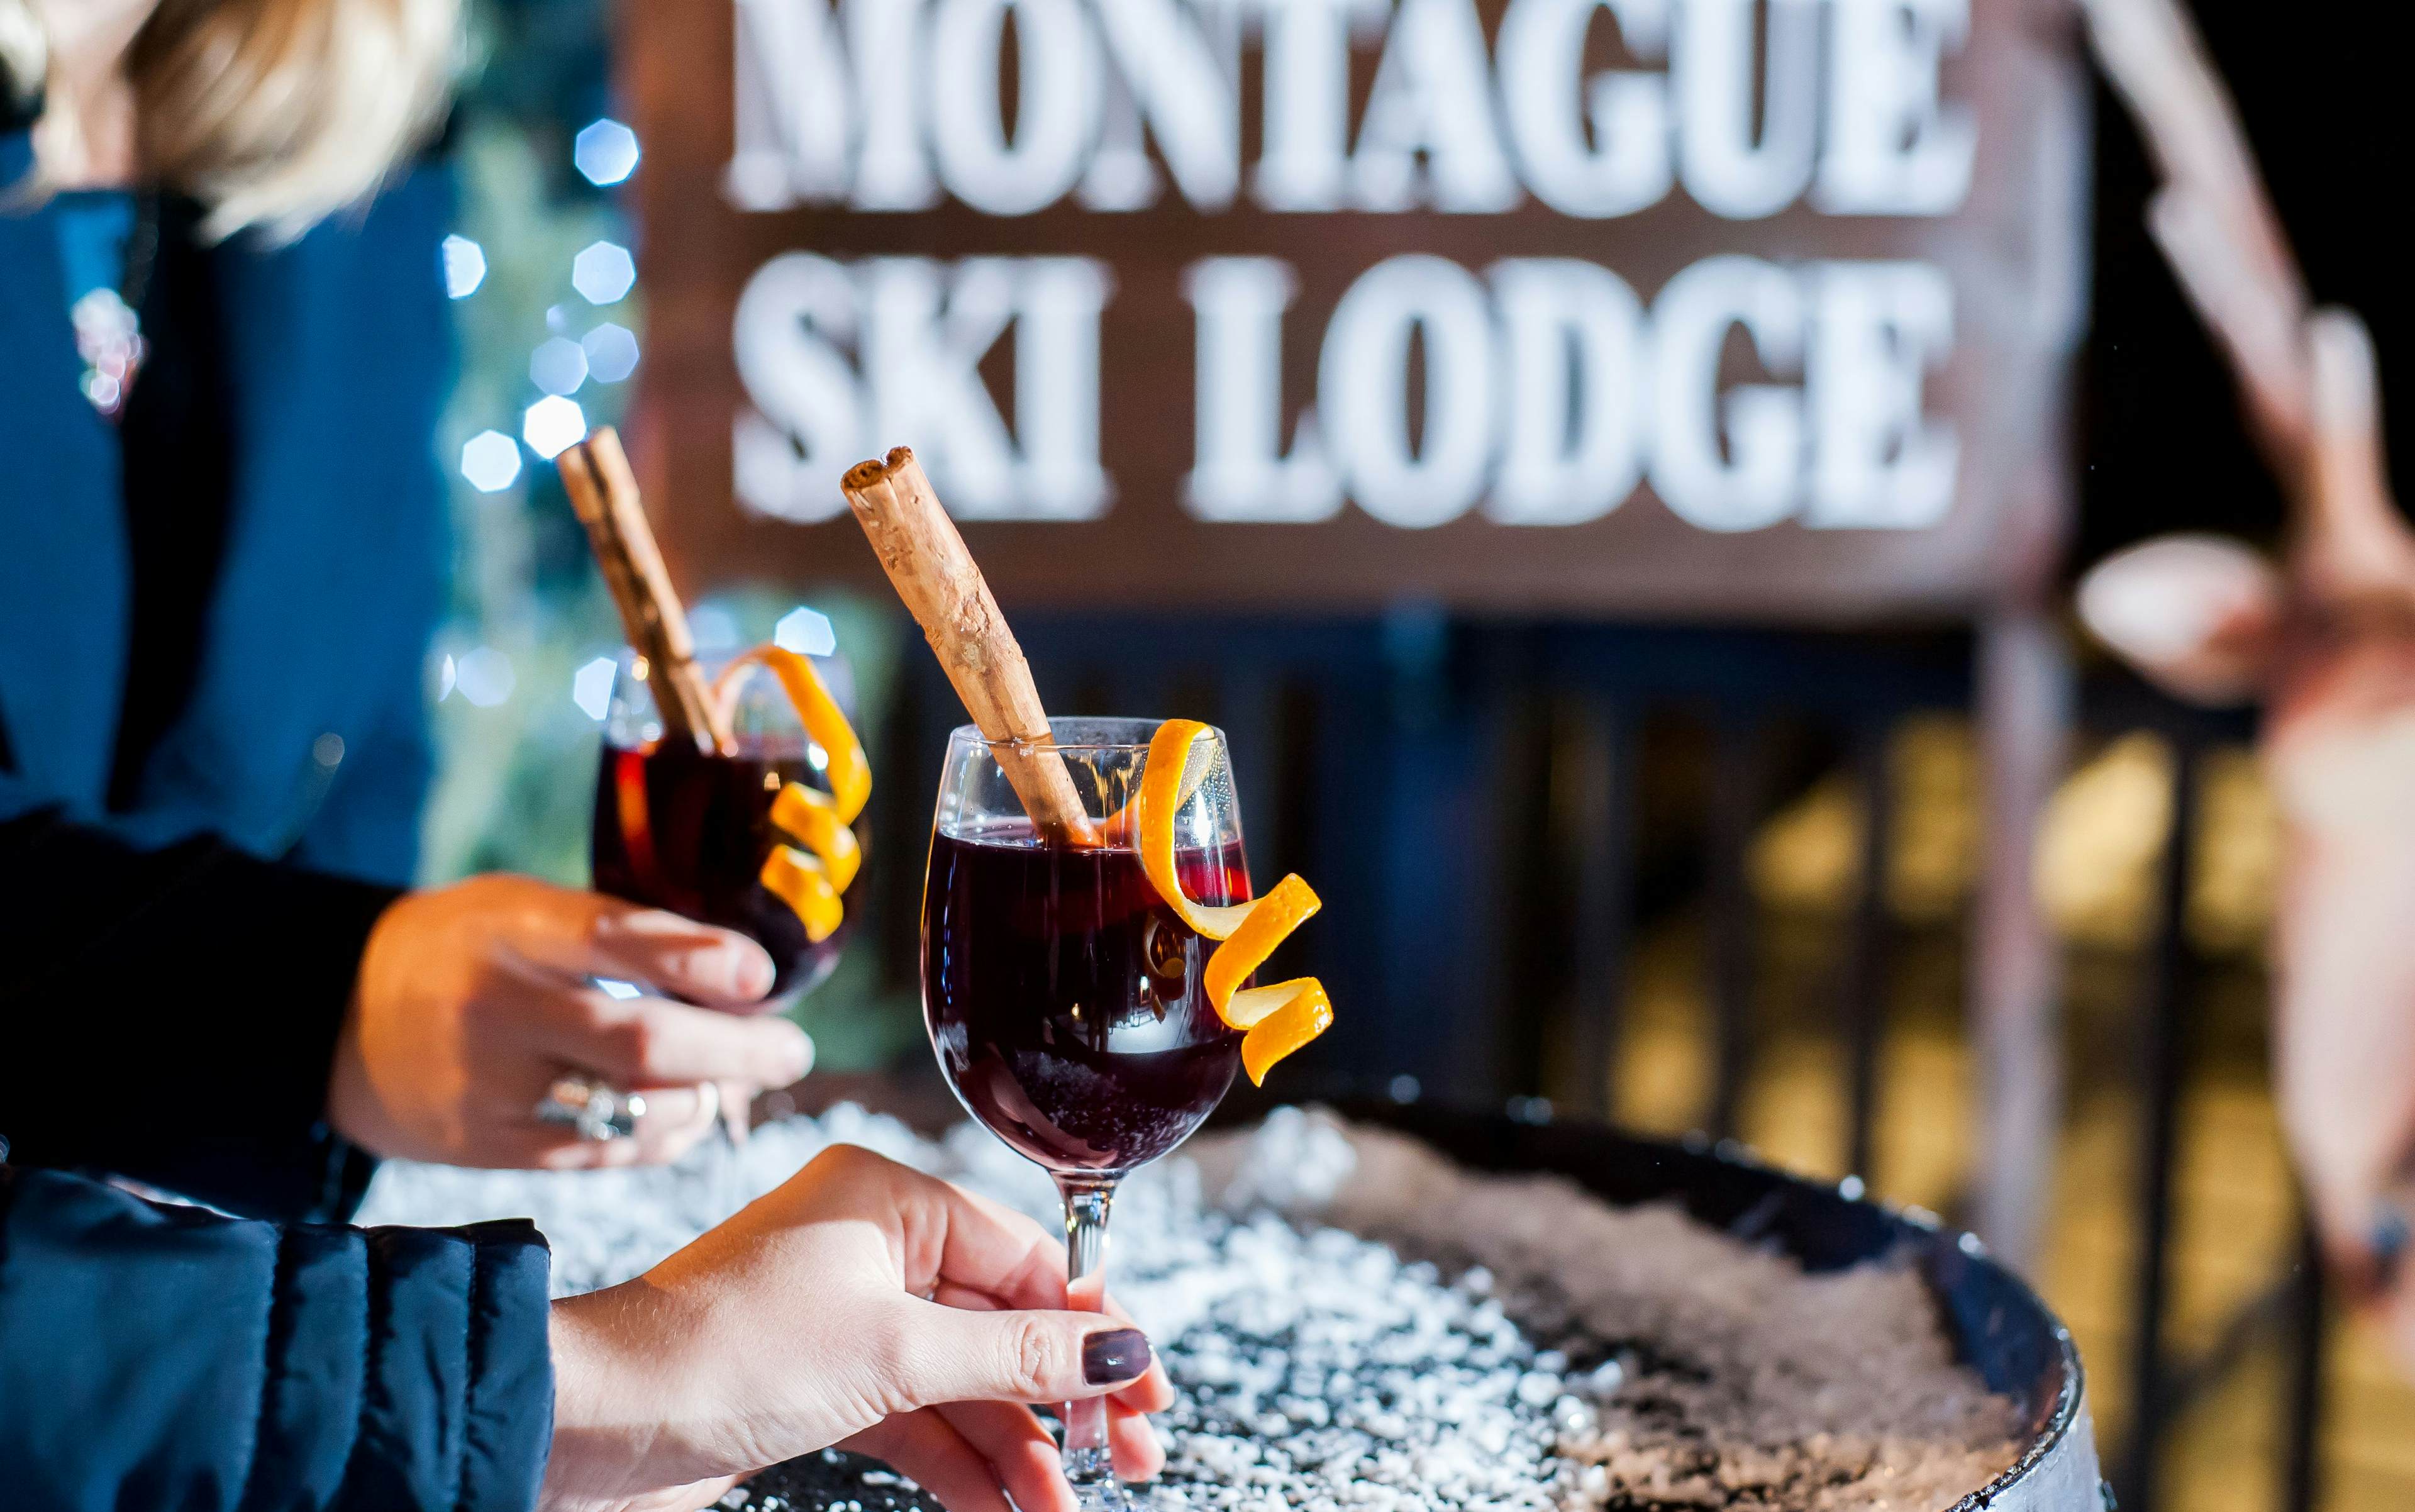 The Montague on the Gardens - The Ski Lodge image 1